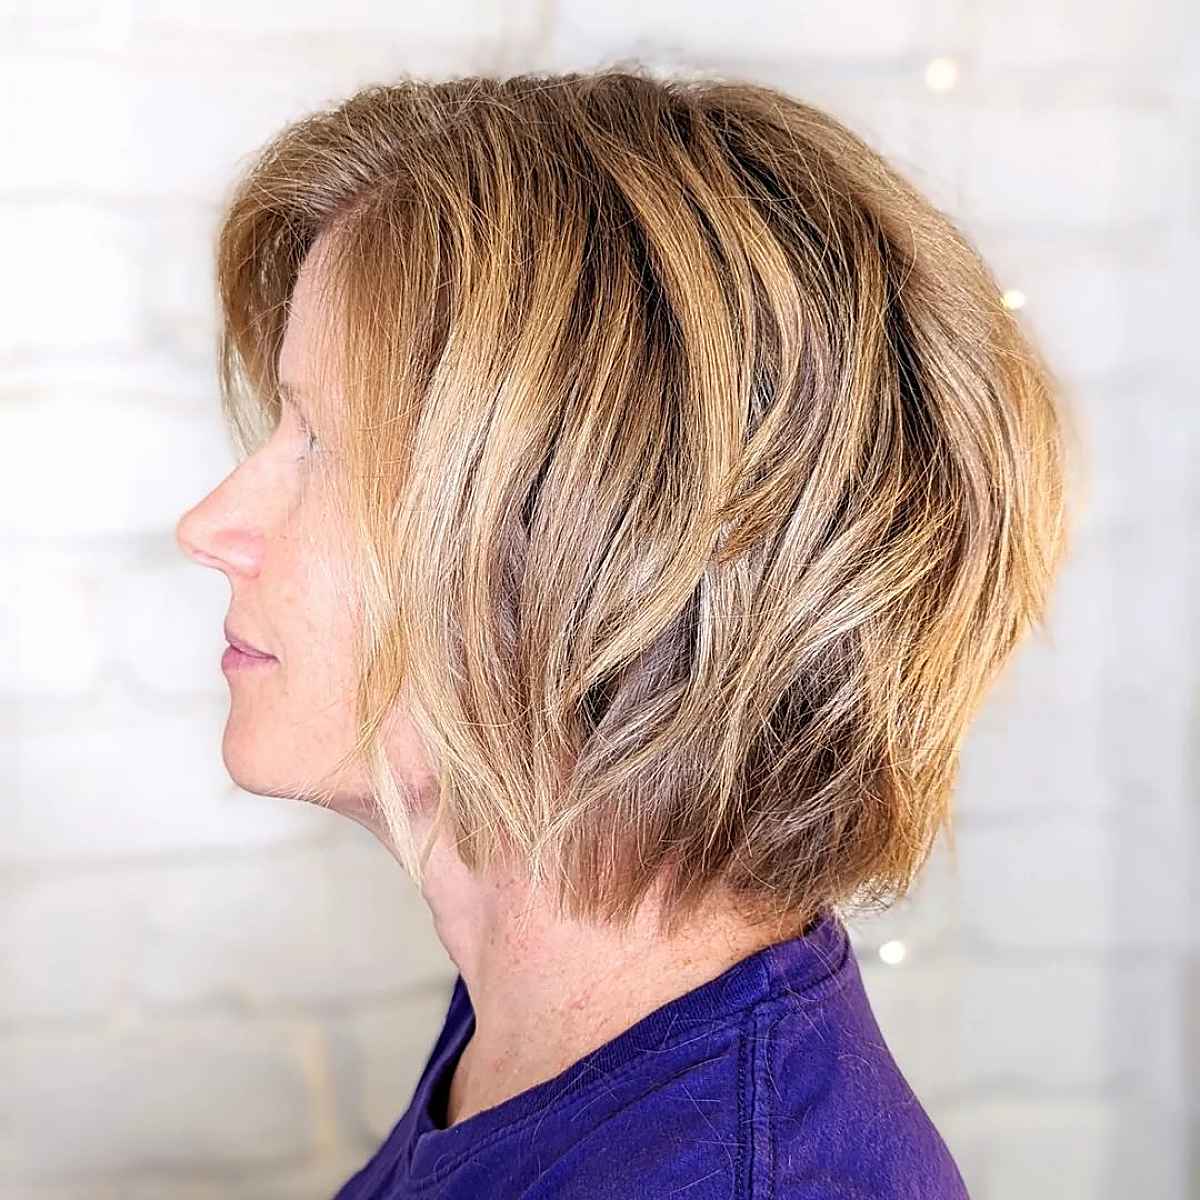 Textured Bob Style with Shorter Layers